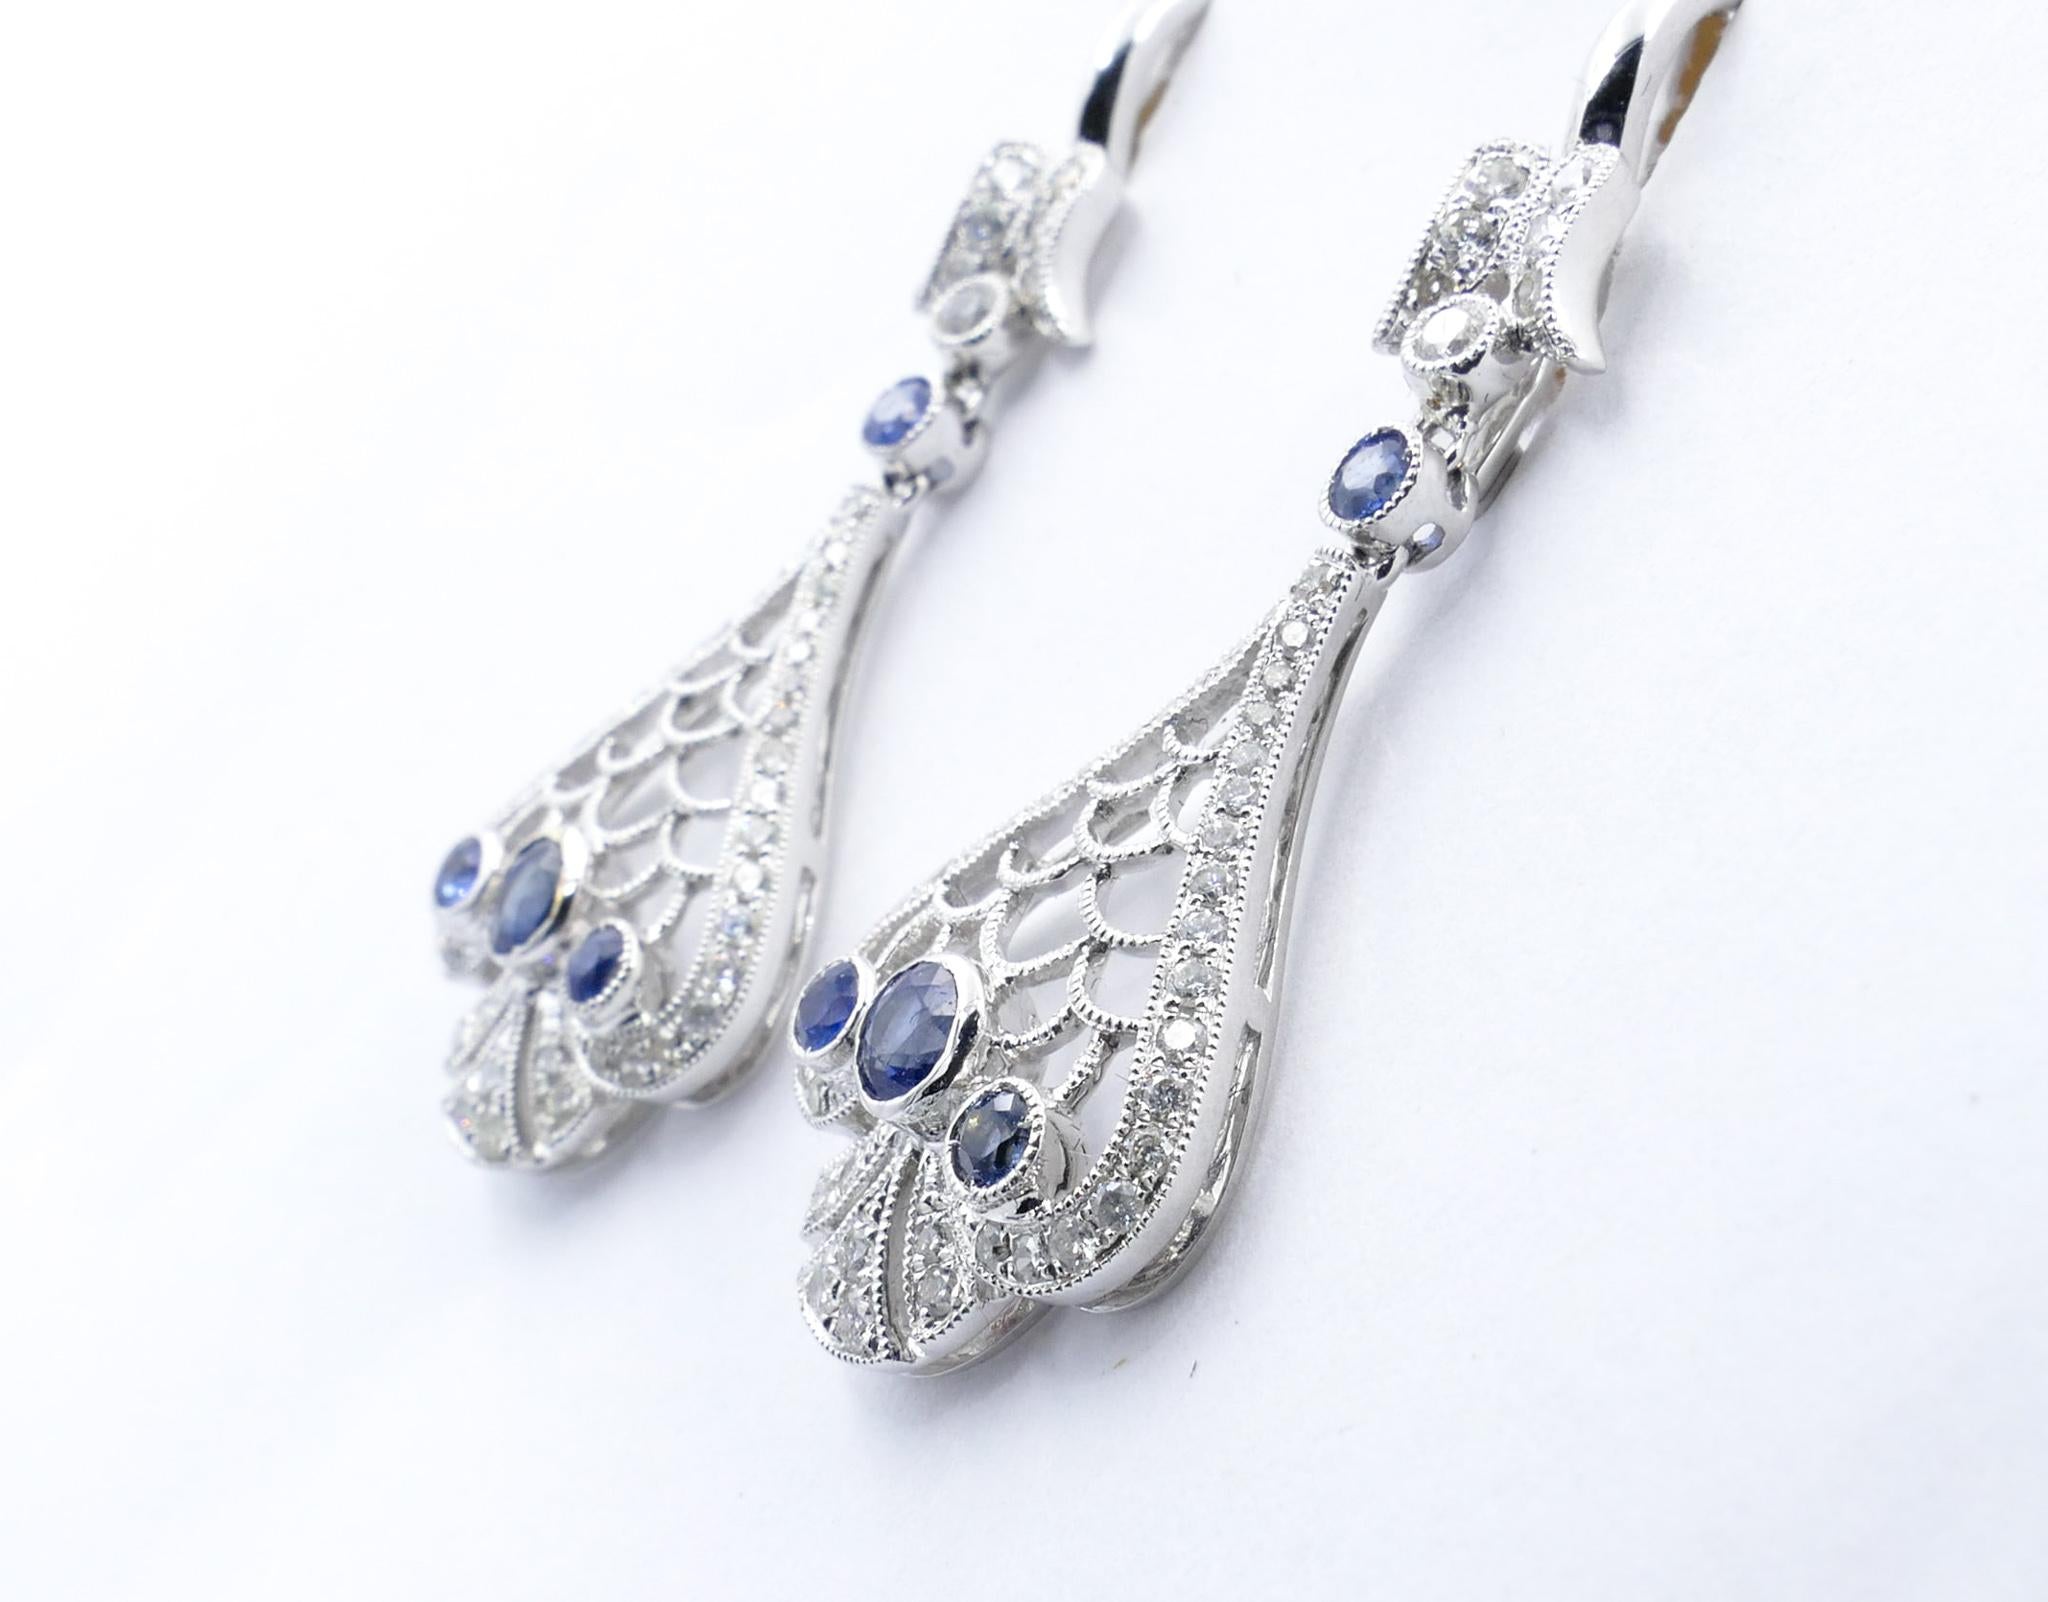 8 medium blue Ceylon Sapphires, clarity eye clean, bezel set with Milligrain detail, and 98 Round Brilliant Cut Diamonds Colour G/H, Clarity SI1 - SI2 make up these very pretty Earrings.
The Earrings measure 43mm X 15mm and feature Lever Back